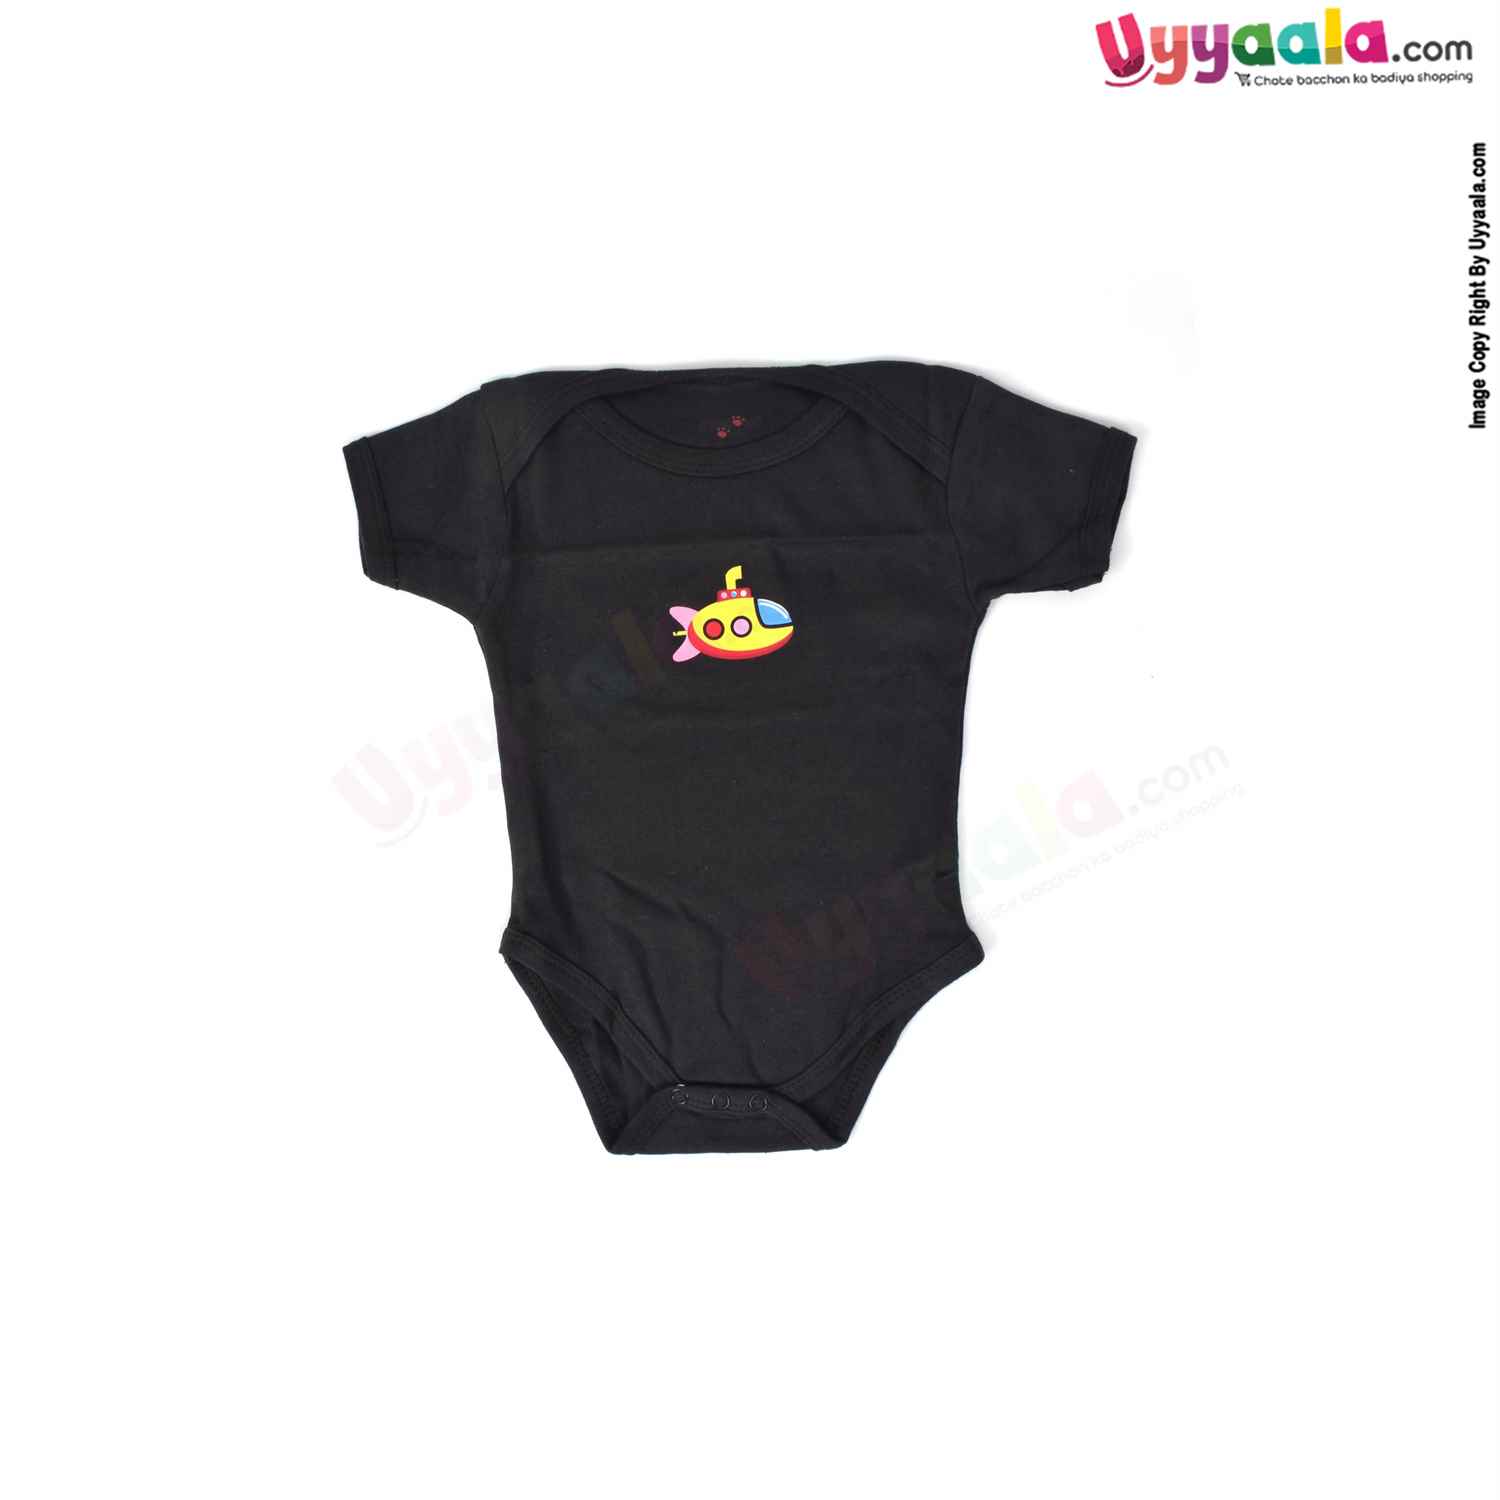 Precious One Short Sleeve Body Suit 100% Soft Hosiery Cotton - Black with Airship Print (6-9M)